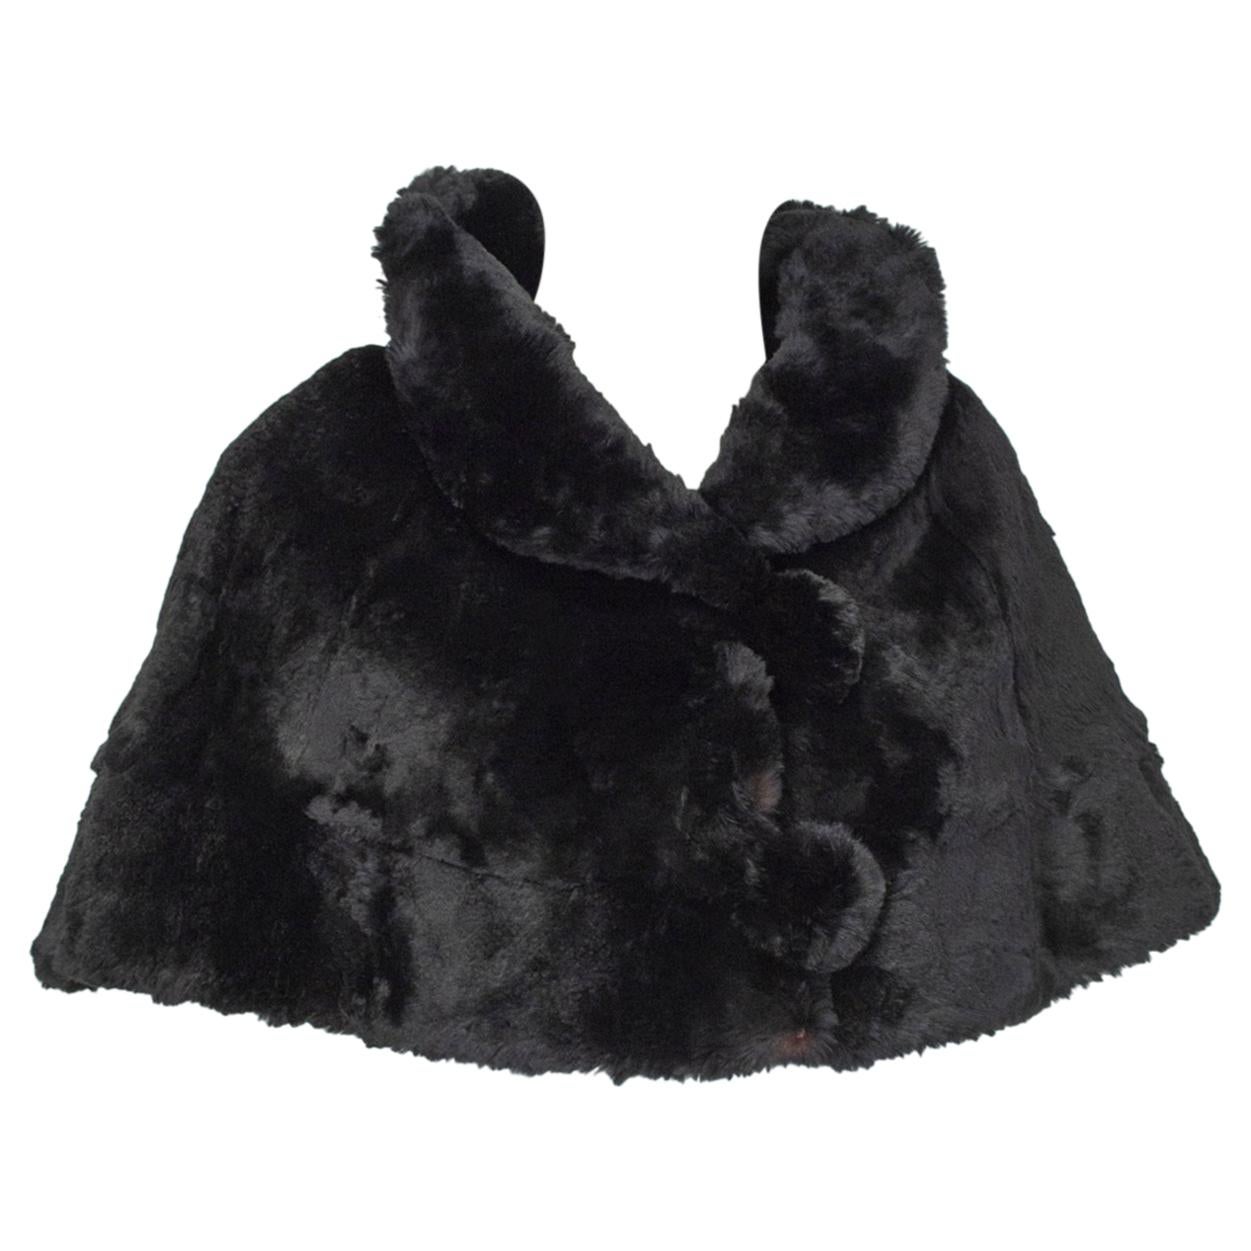 Black Shearling Capelet Stole with Shawl Collar, 1950s